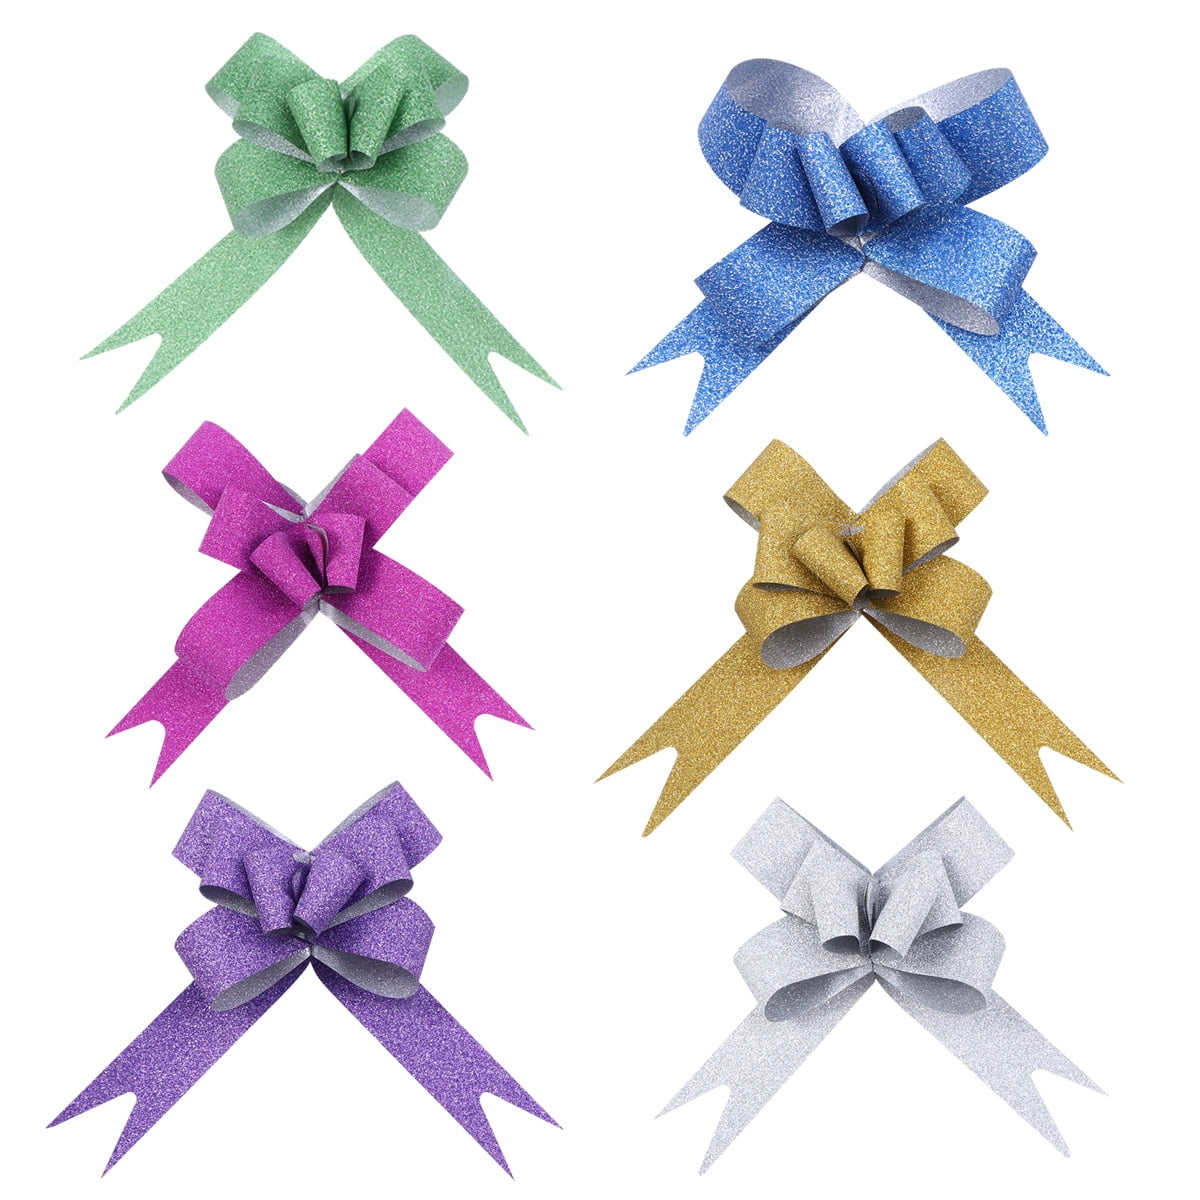 100pcs 18mm Glitter Pull Bows Gift Knot Ribbons String Bows for Gift  Wrapping Flower Basket Wedding Car Decoration (Assorted Colors) 